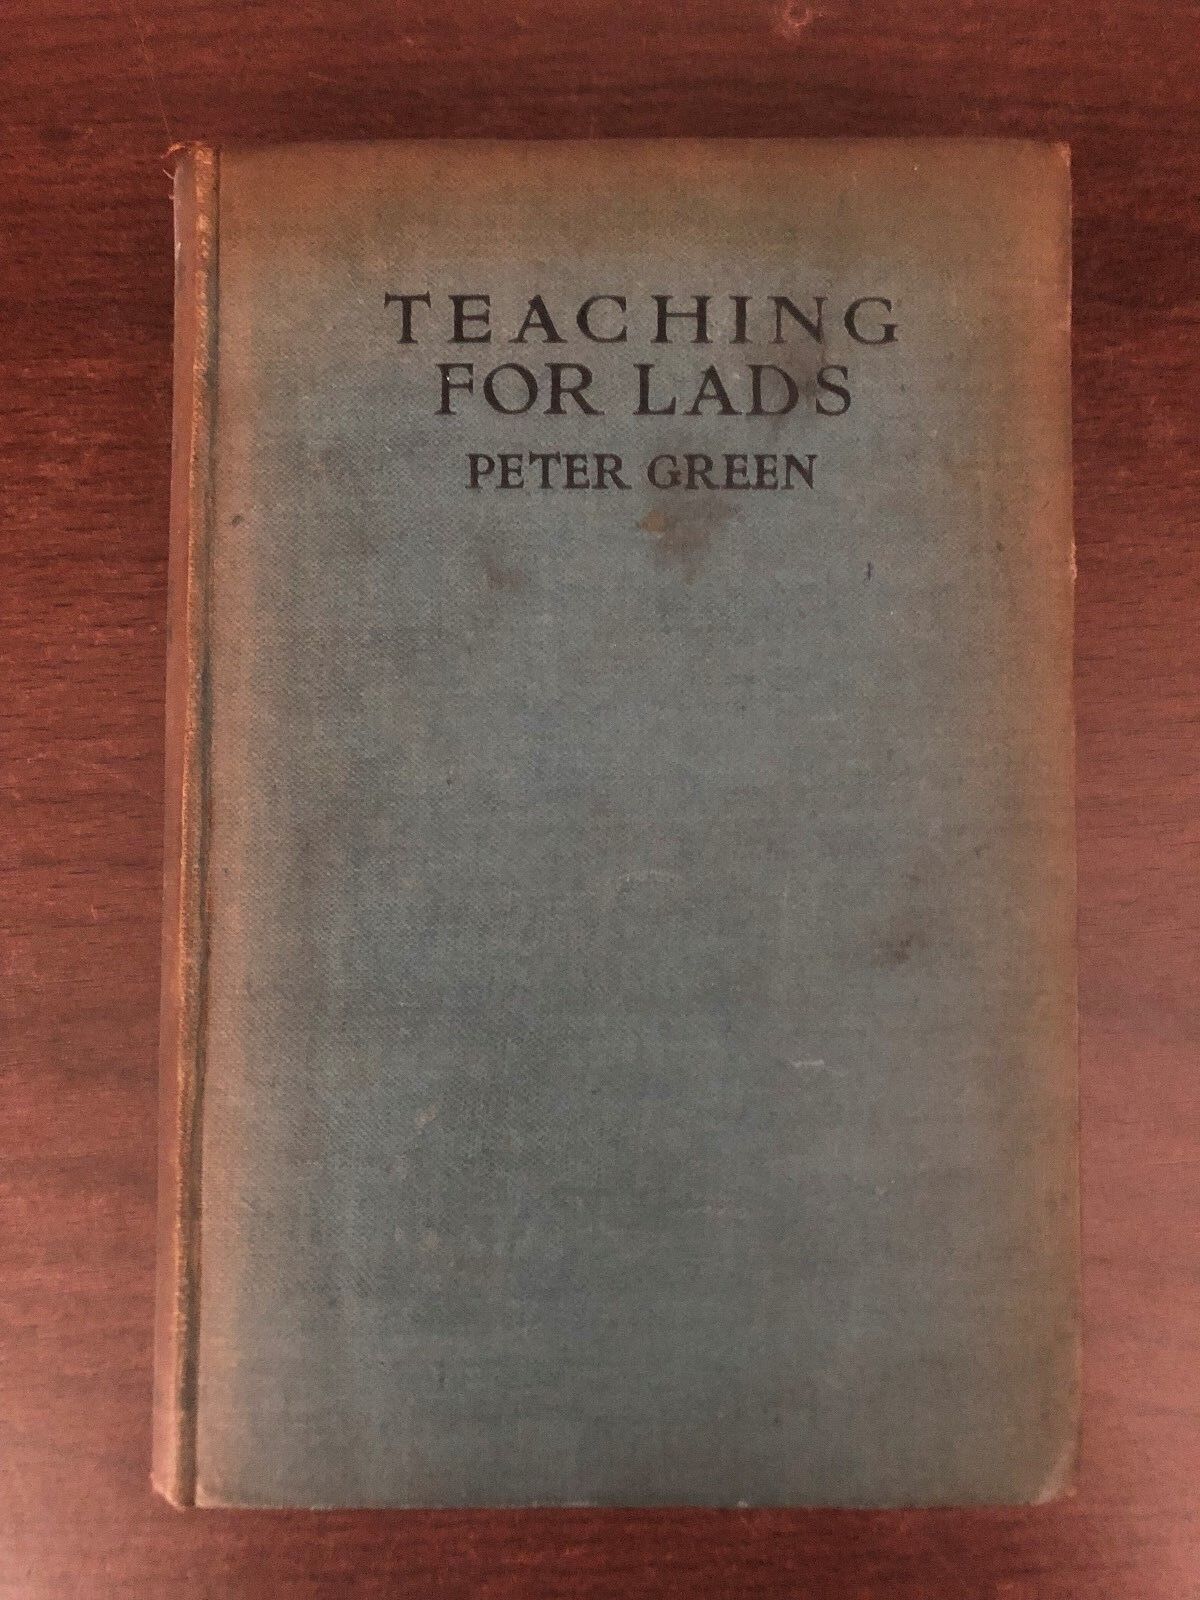 TEACHING FOR LADS by PETER GREEN - EDWARD ARNOLD - H/B - 1917 - UK POST £3.25